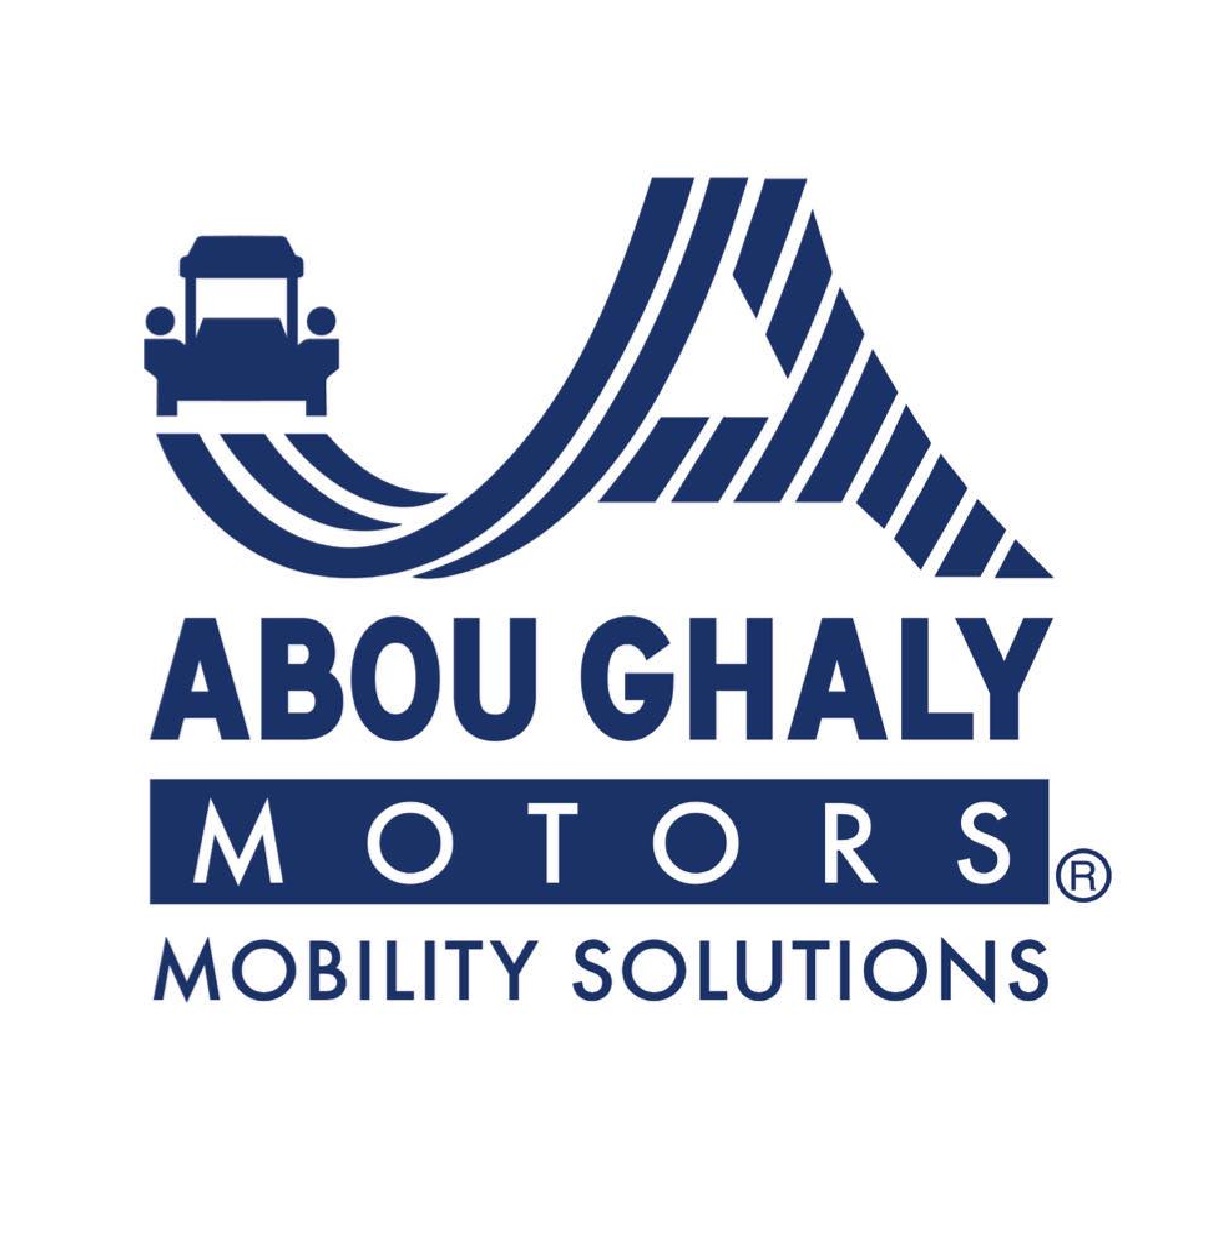 Abou Ghlay Motors